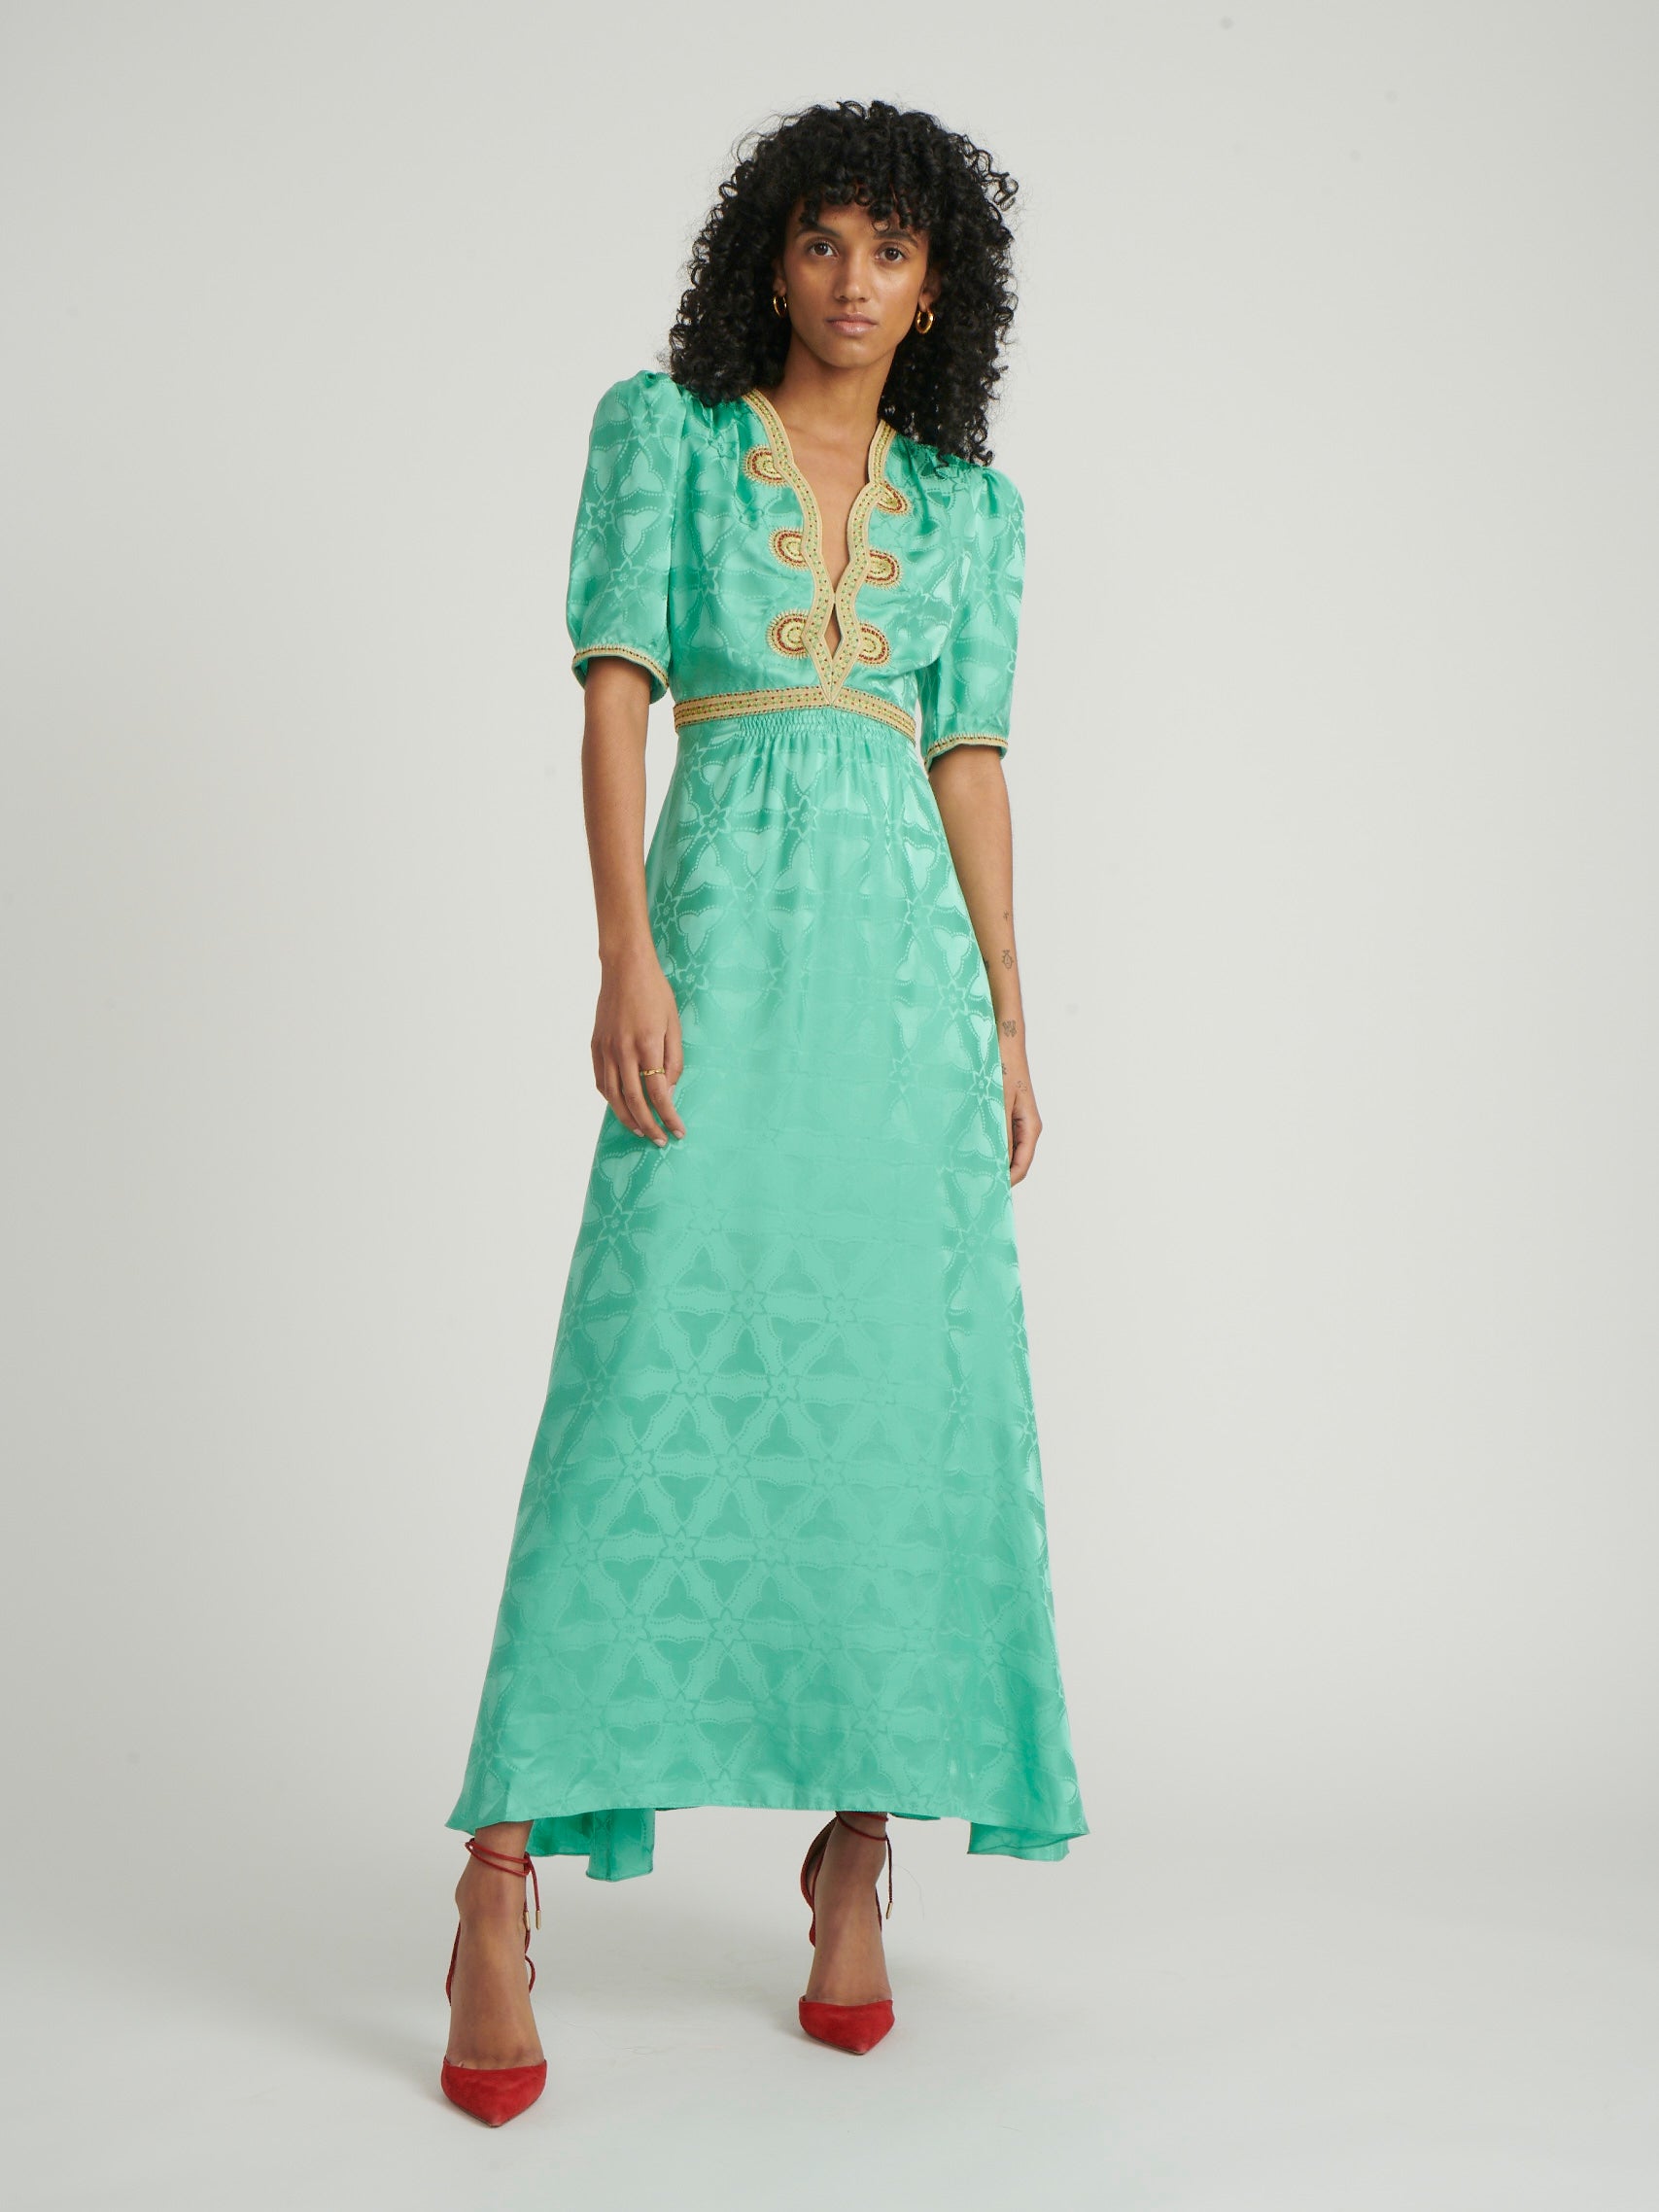 Tabitha Dress in Mint with Ornate Embroidery